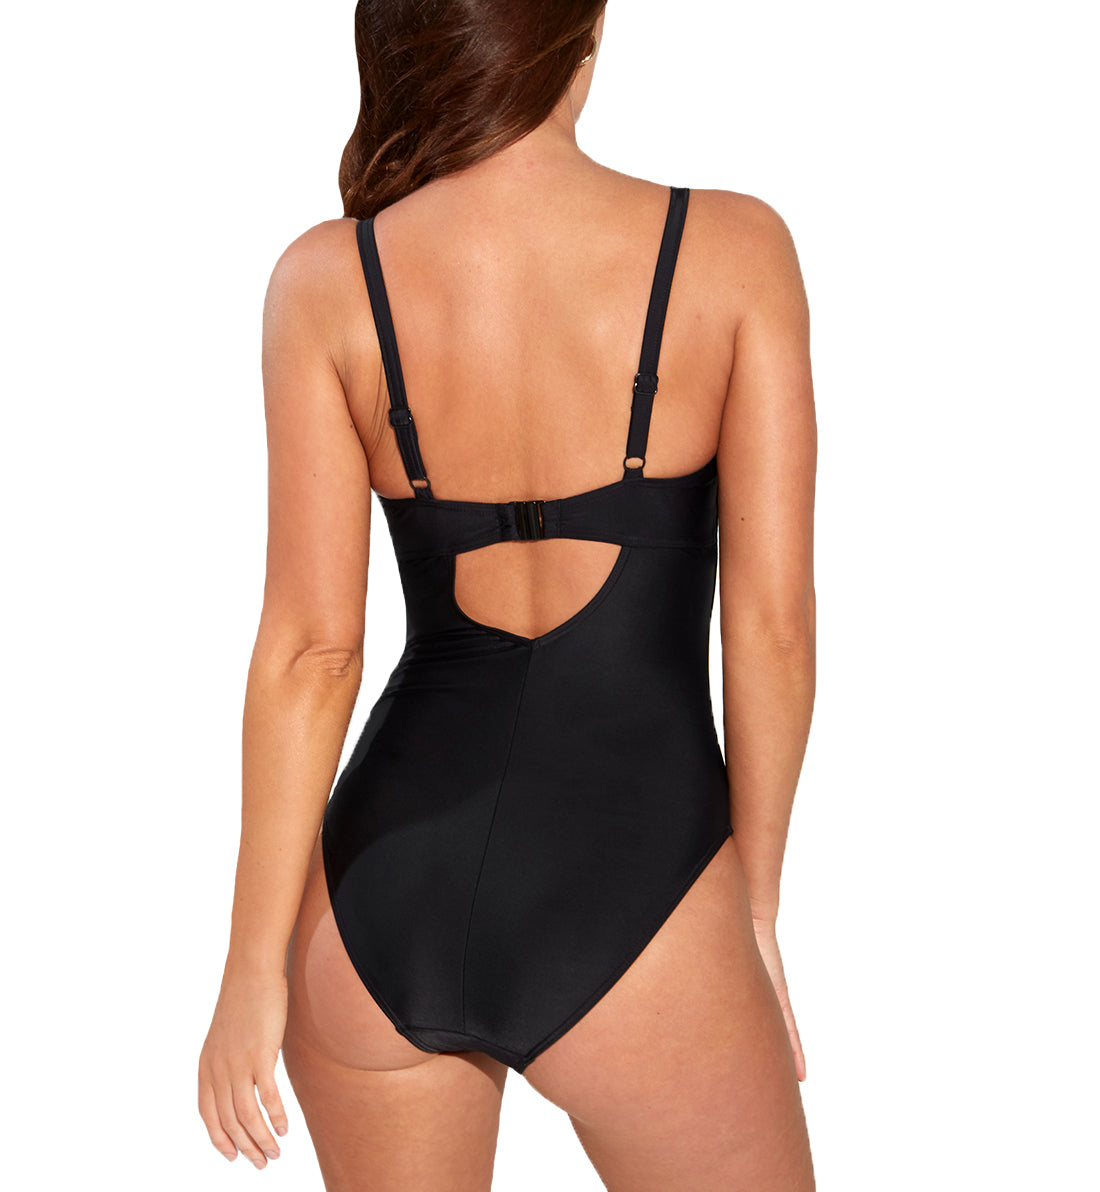 Pour Moi Contour Piping Underwire Non Padded Control Swimsuit (25206),34FF,Black - Black,34FF